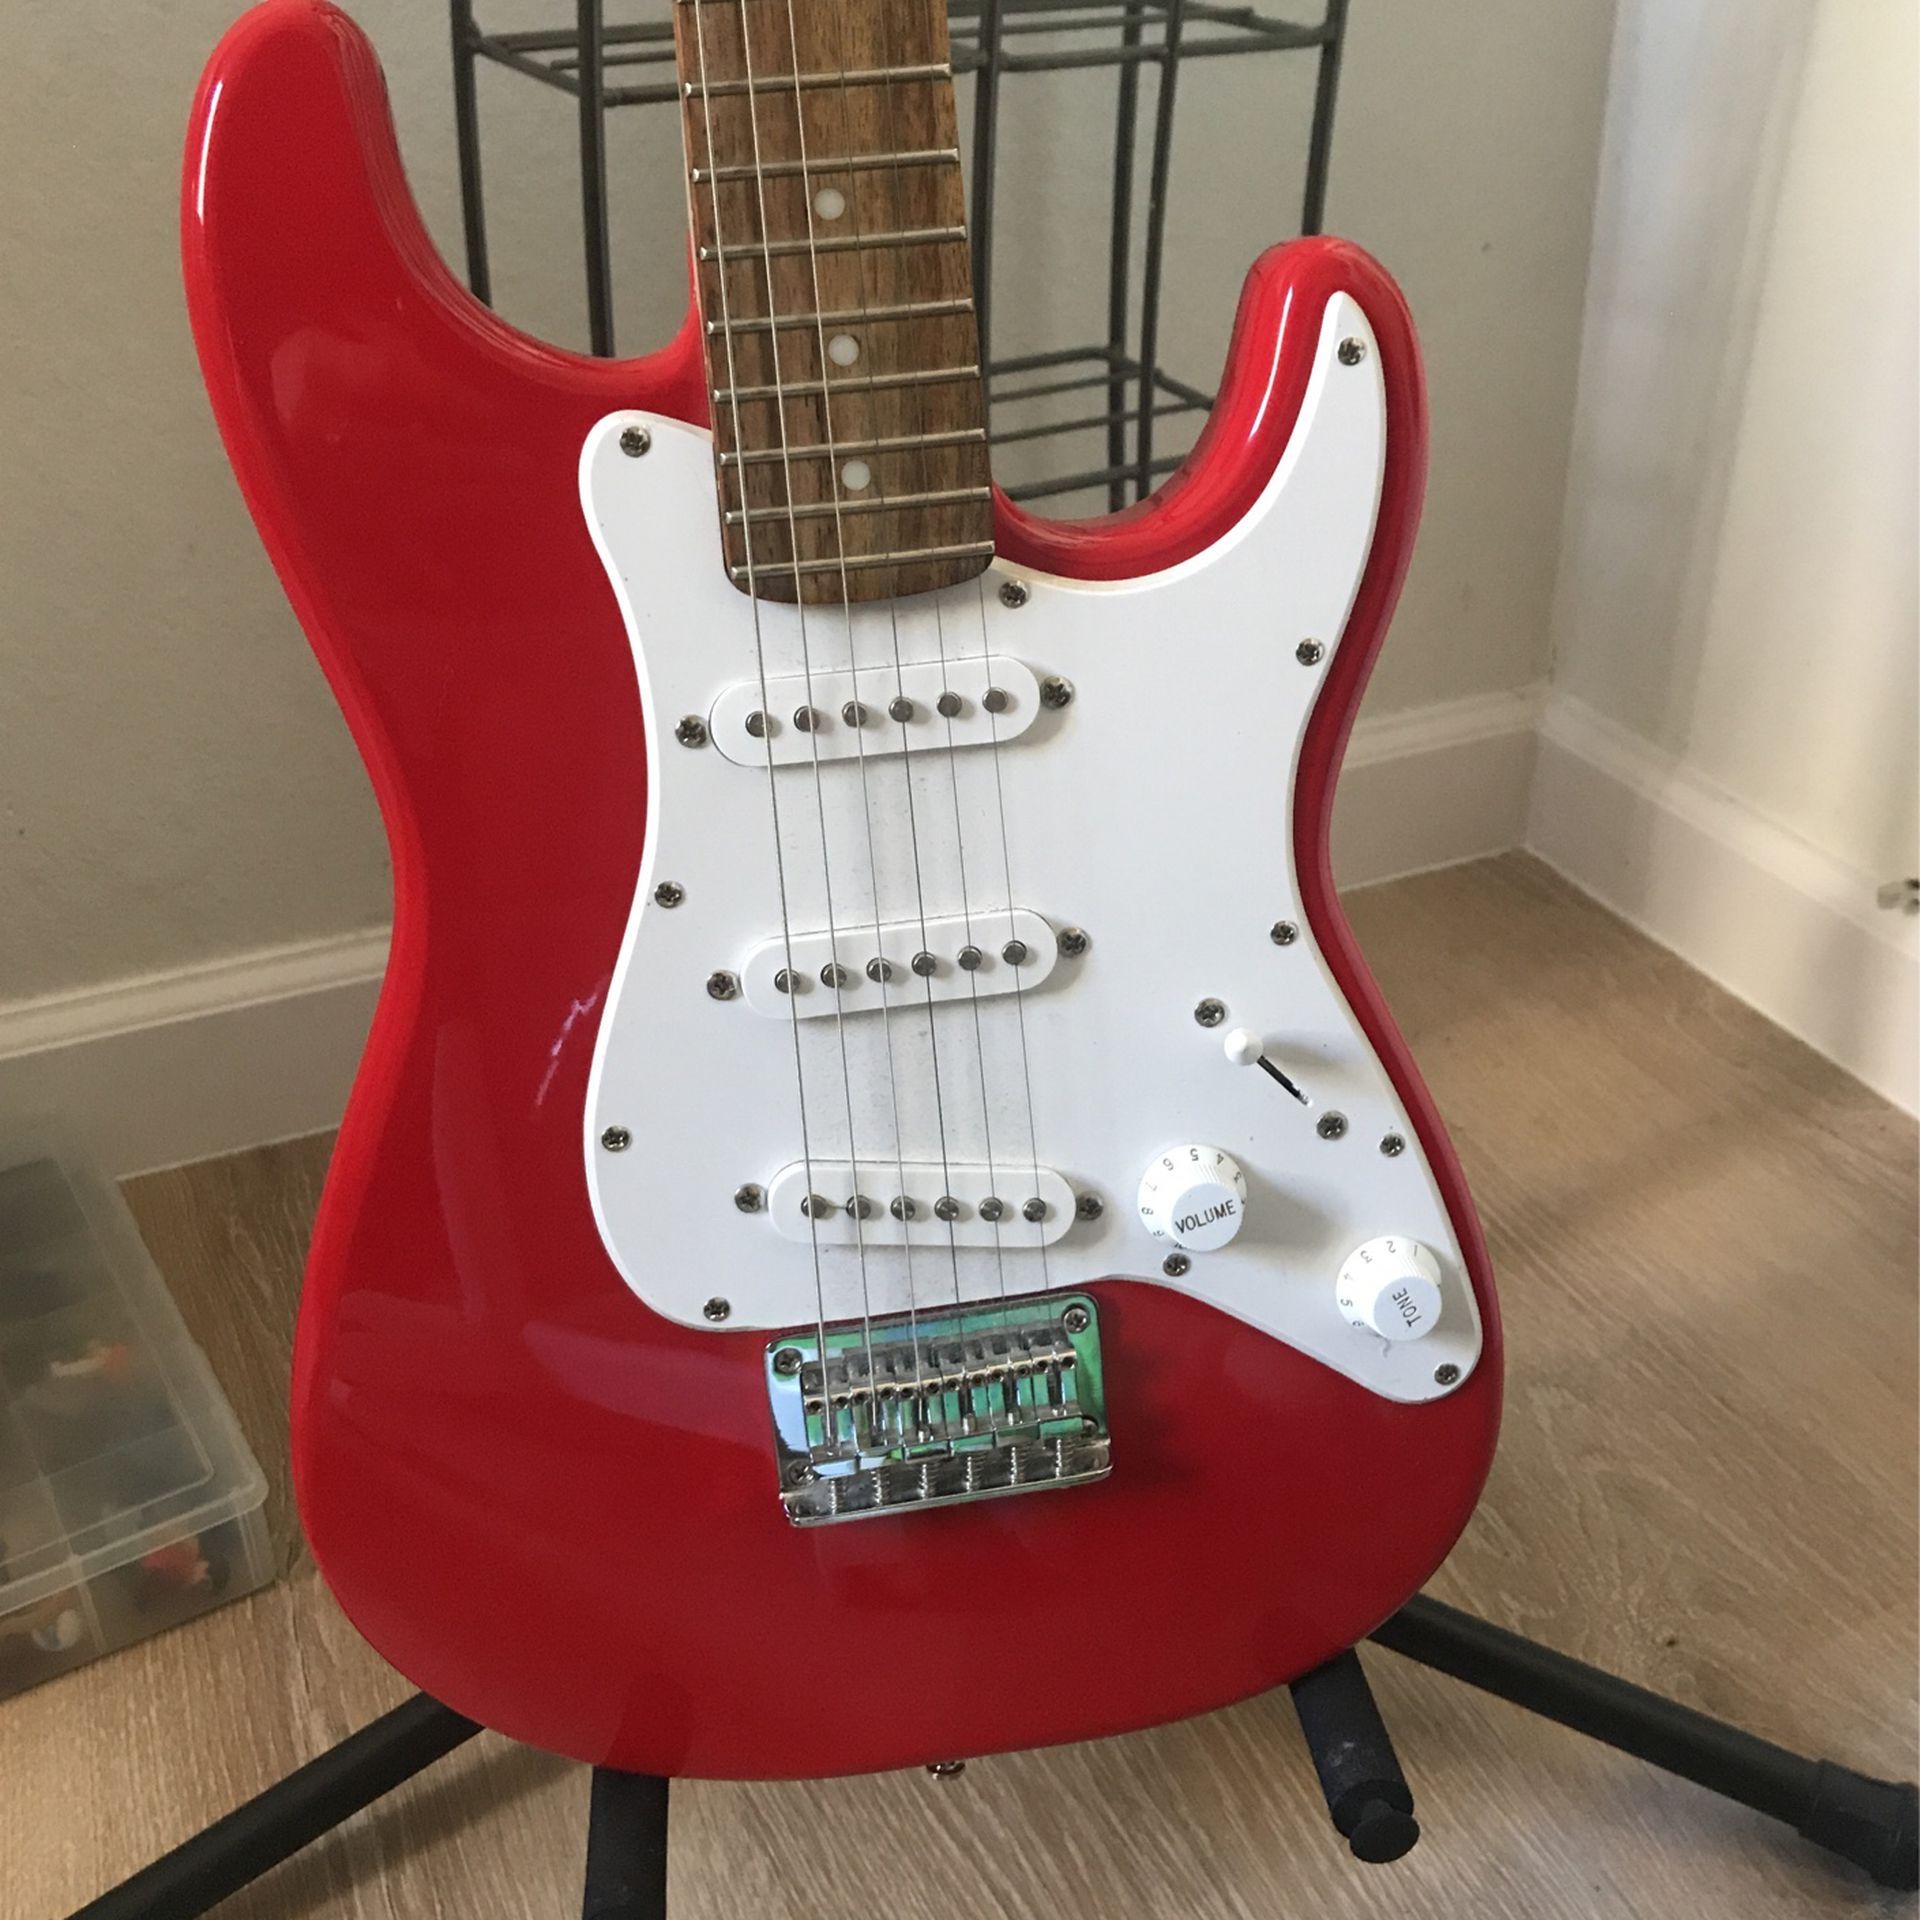 SQUIER AFFINITY MINI STRATOCASTER V2 ELECTRIC GUITAR